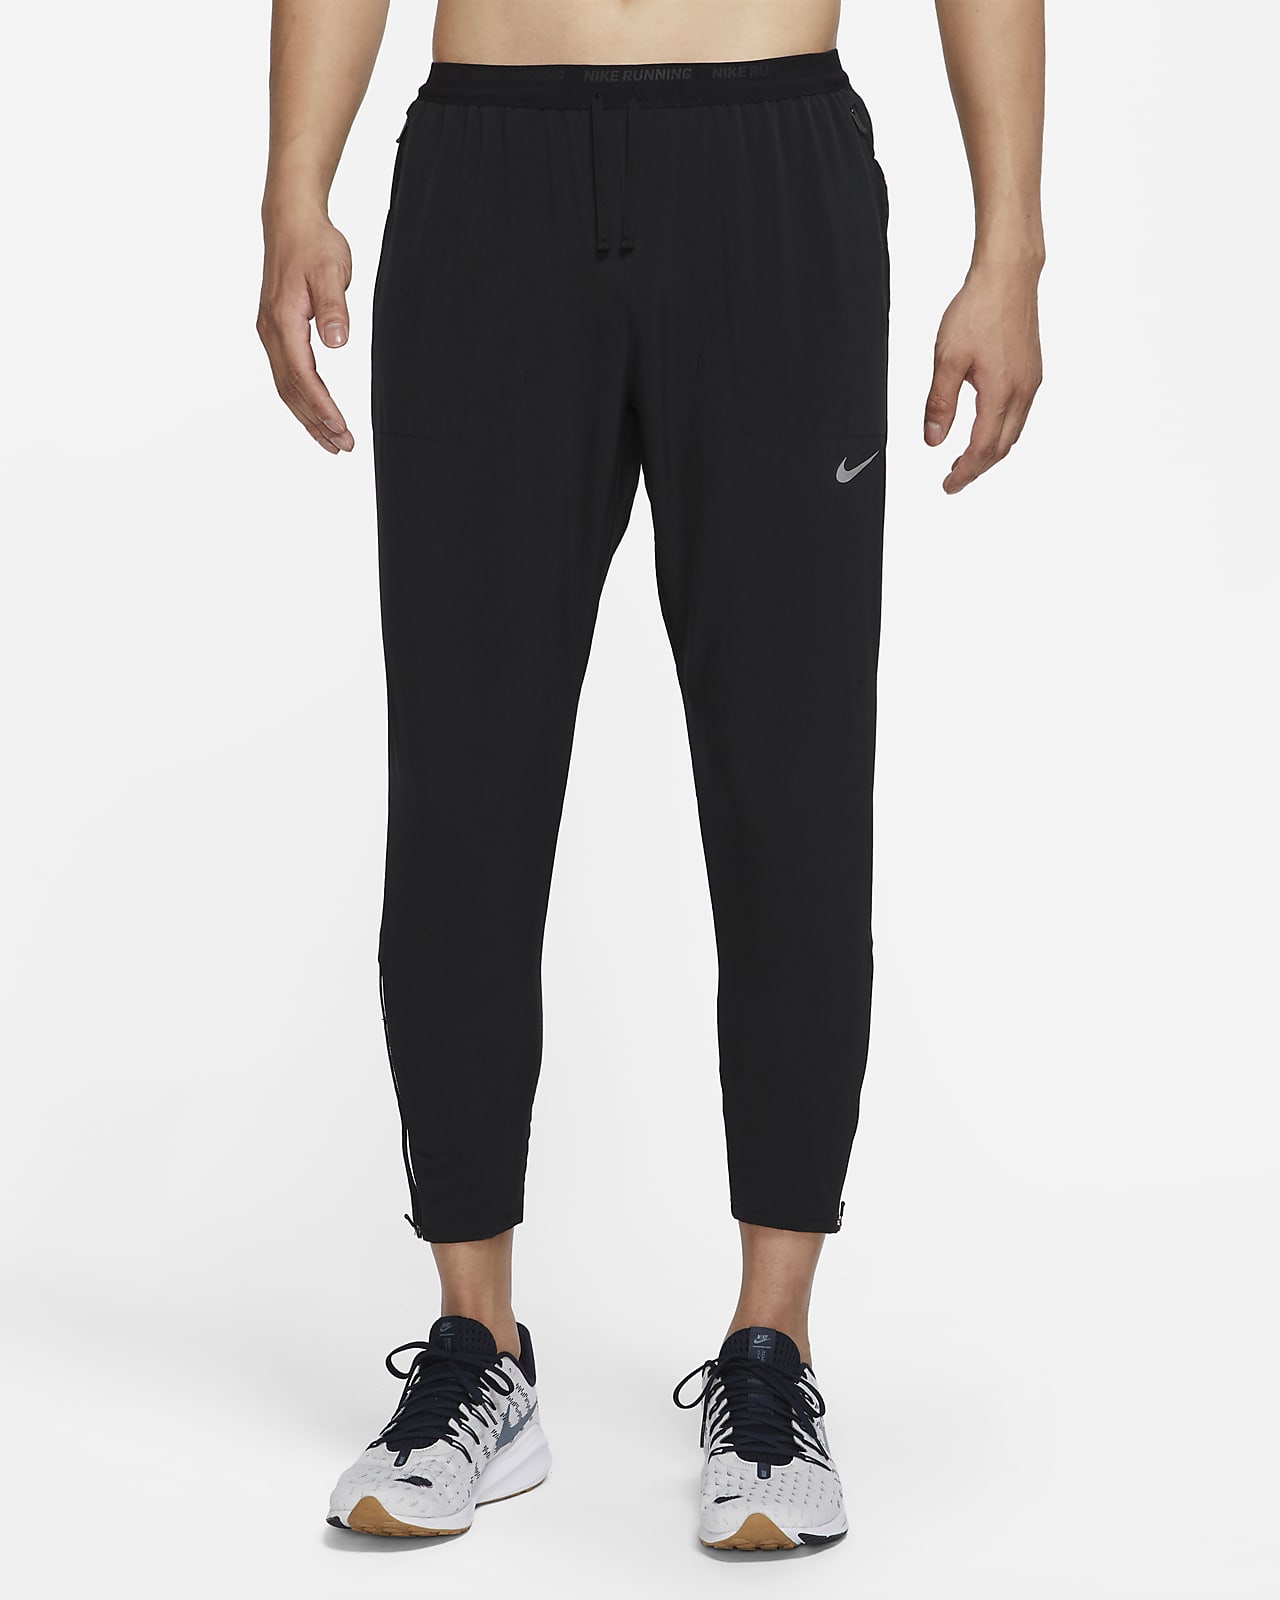 Details 234+ nike trousers mens